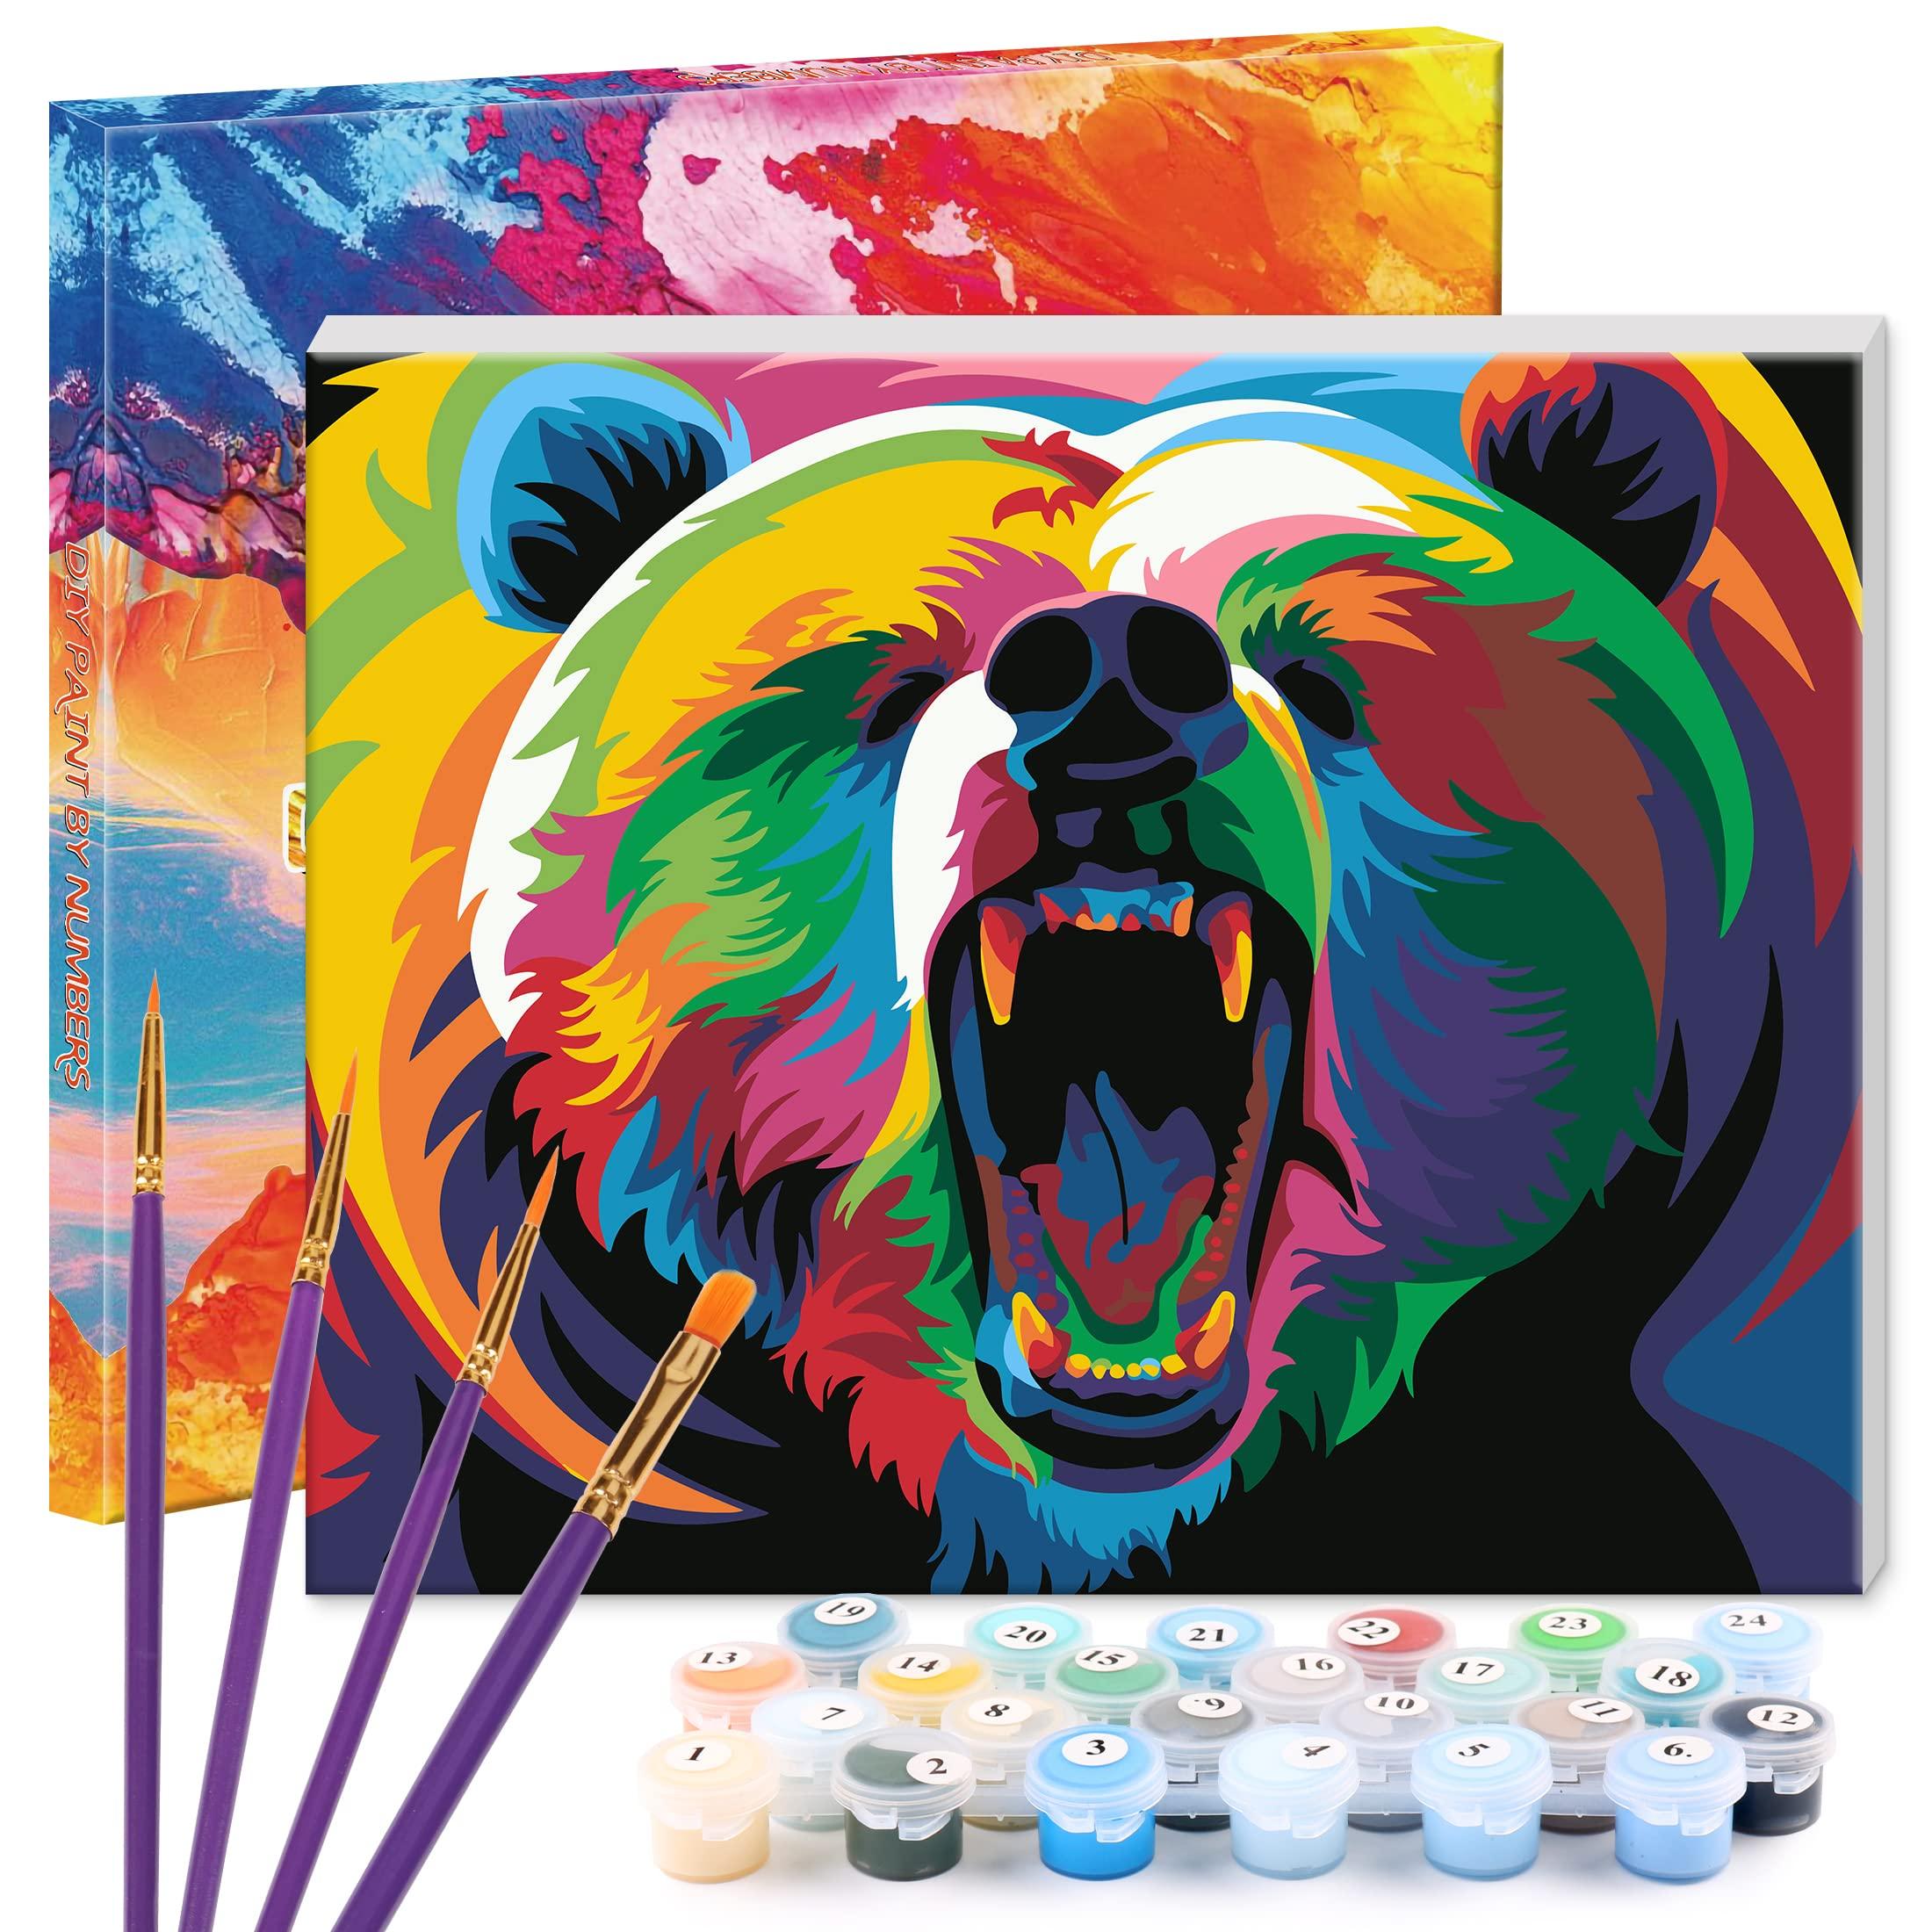 WISKALON Paint by Numbers Animals for Adults Kids DIY Oil Painting by Numbers Kits on Canvas with 3X Magnifier, Acrylic Paints and Brushes - Colorful Bear 40cm x 50cm (Wooden Frame)